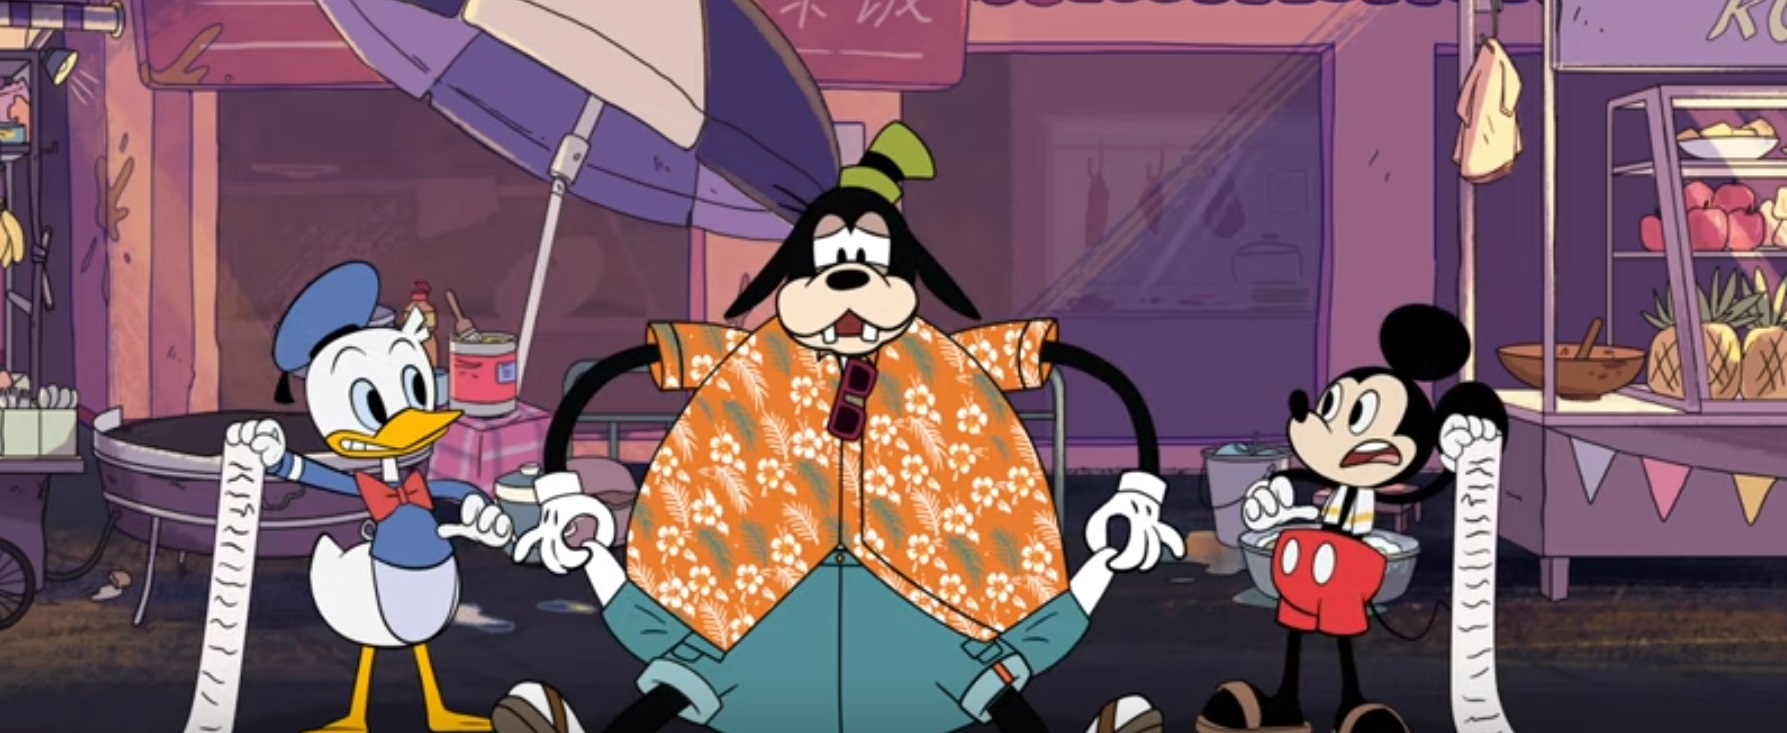 Goofy showing his empty pockets